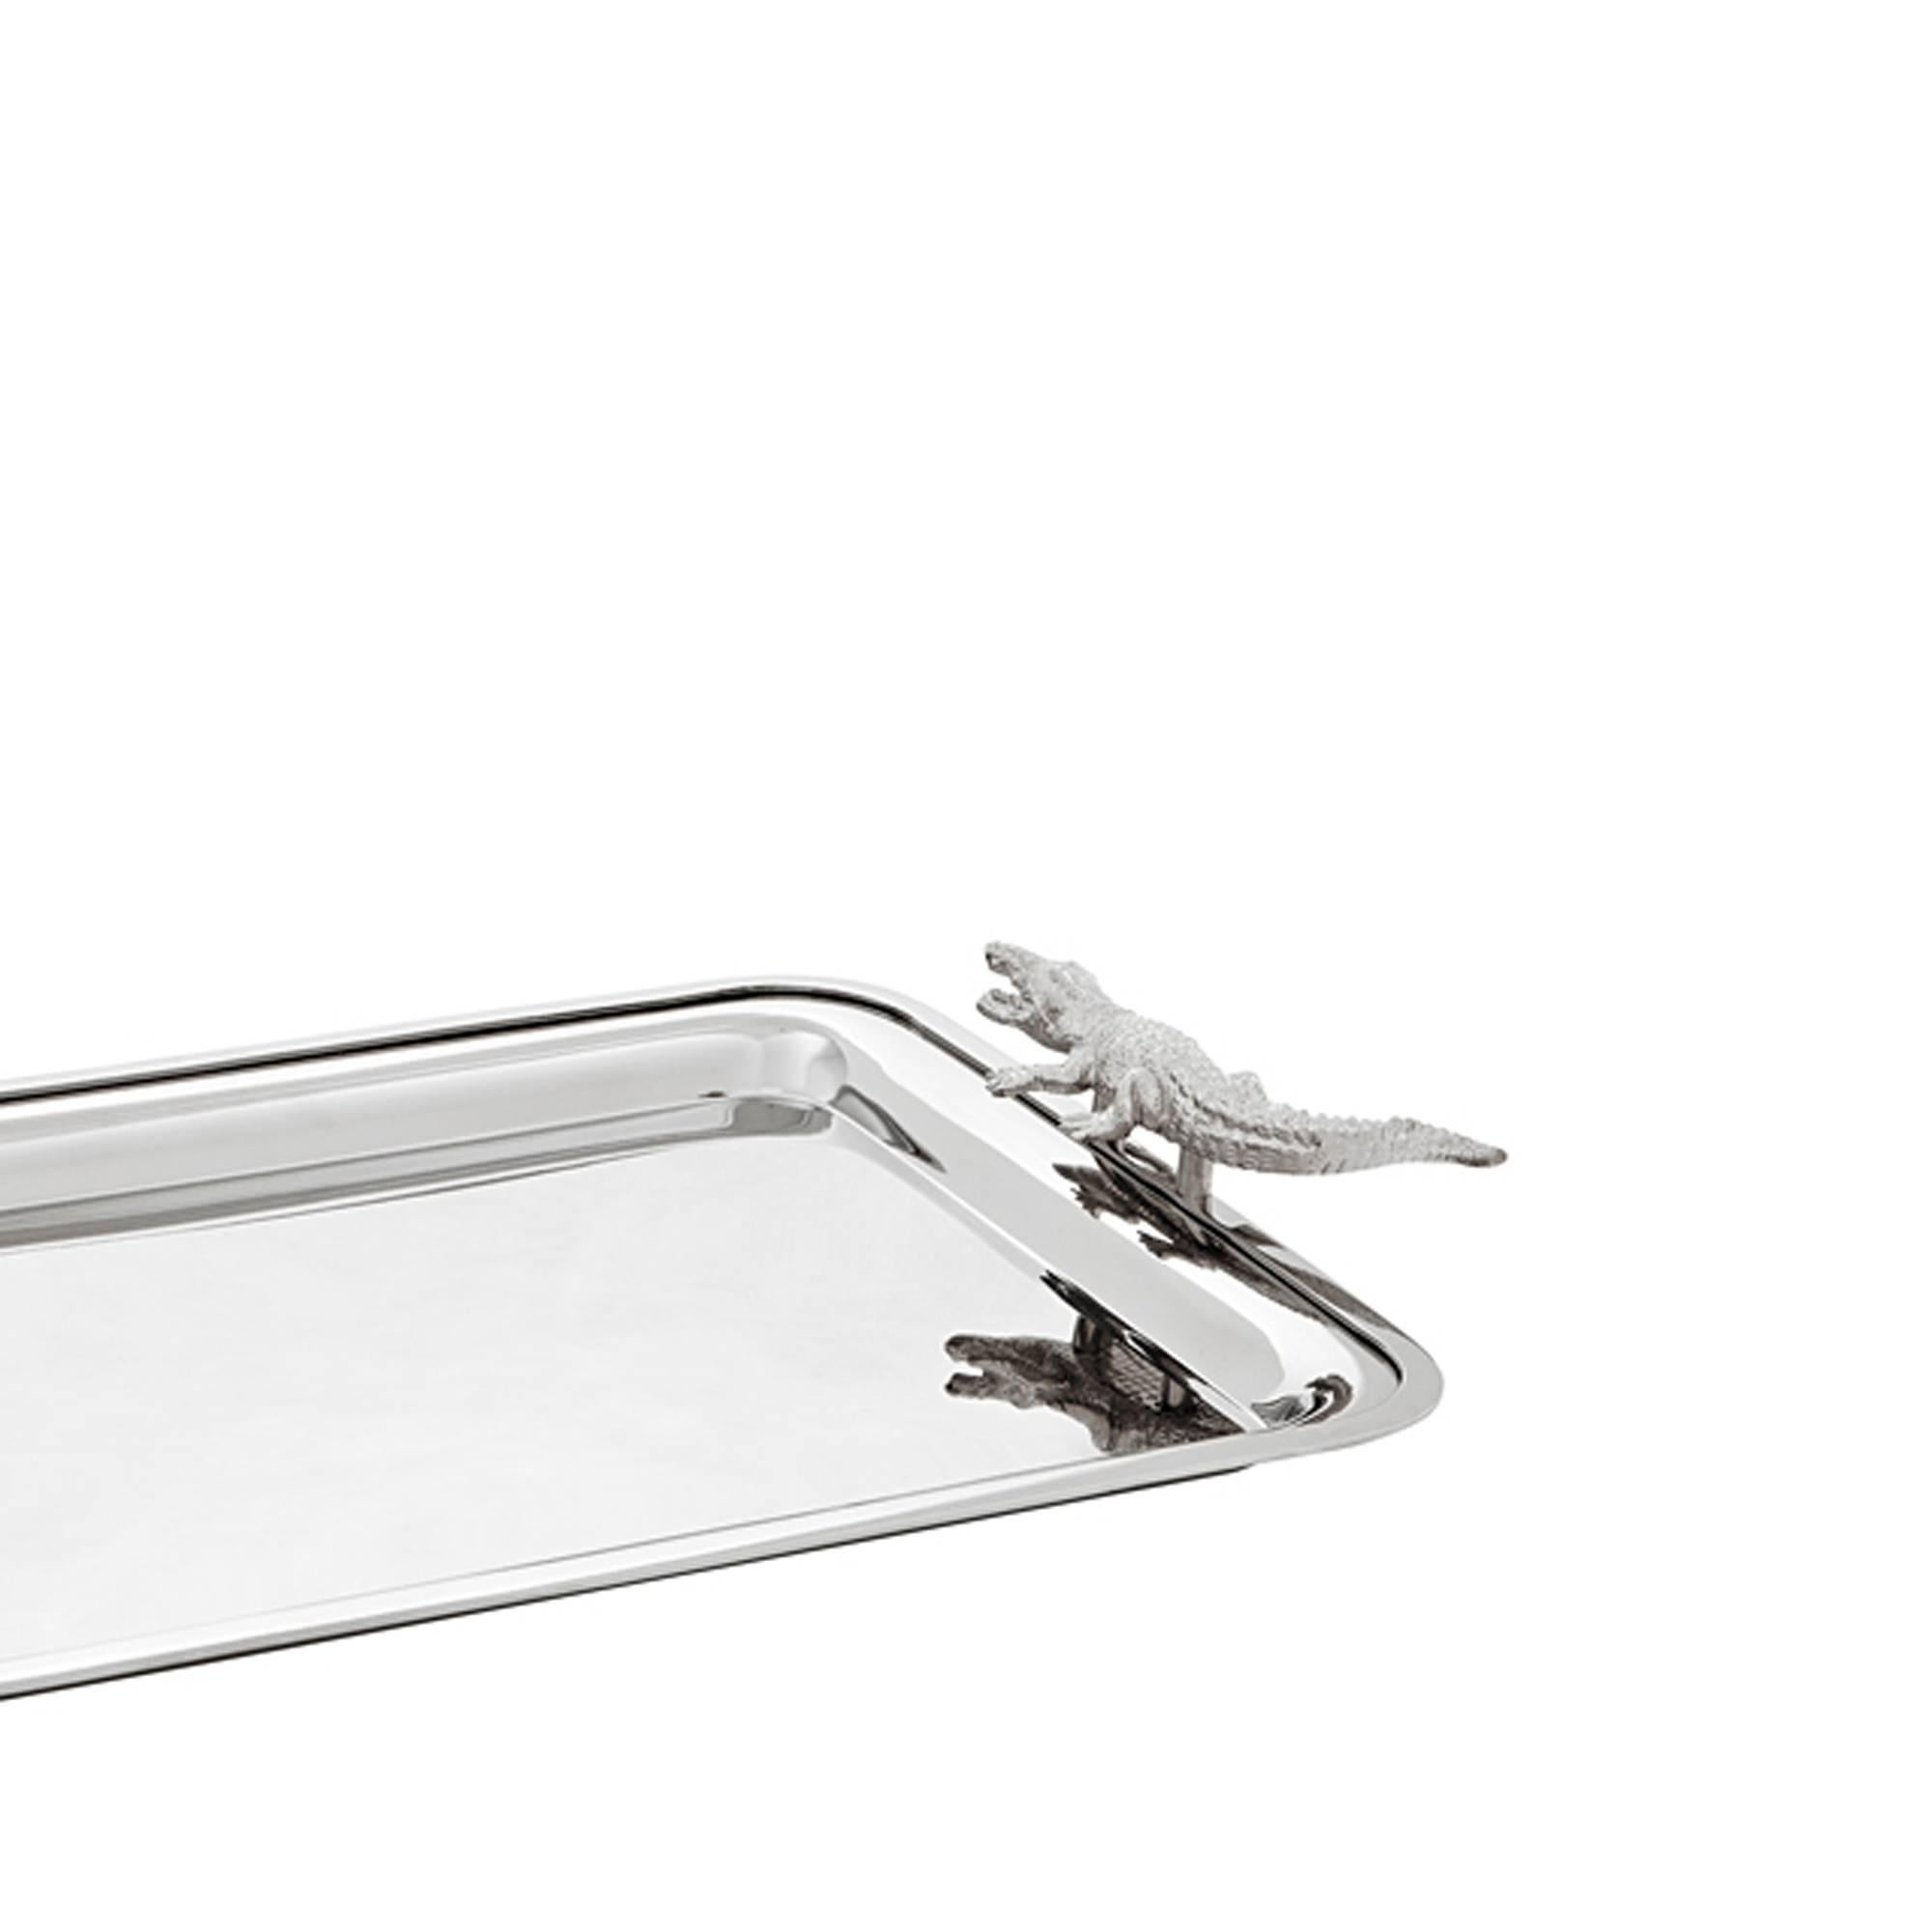 Indian Cayman Tray in Polished Stainless Steel and Nickel